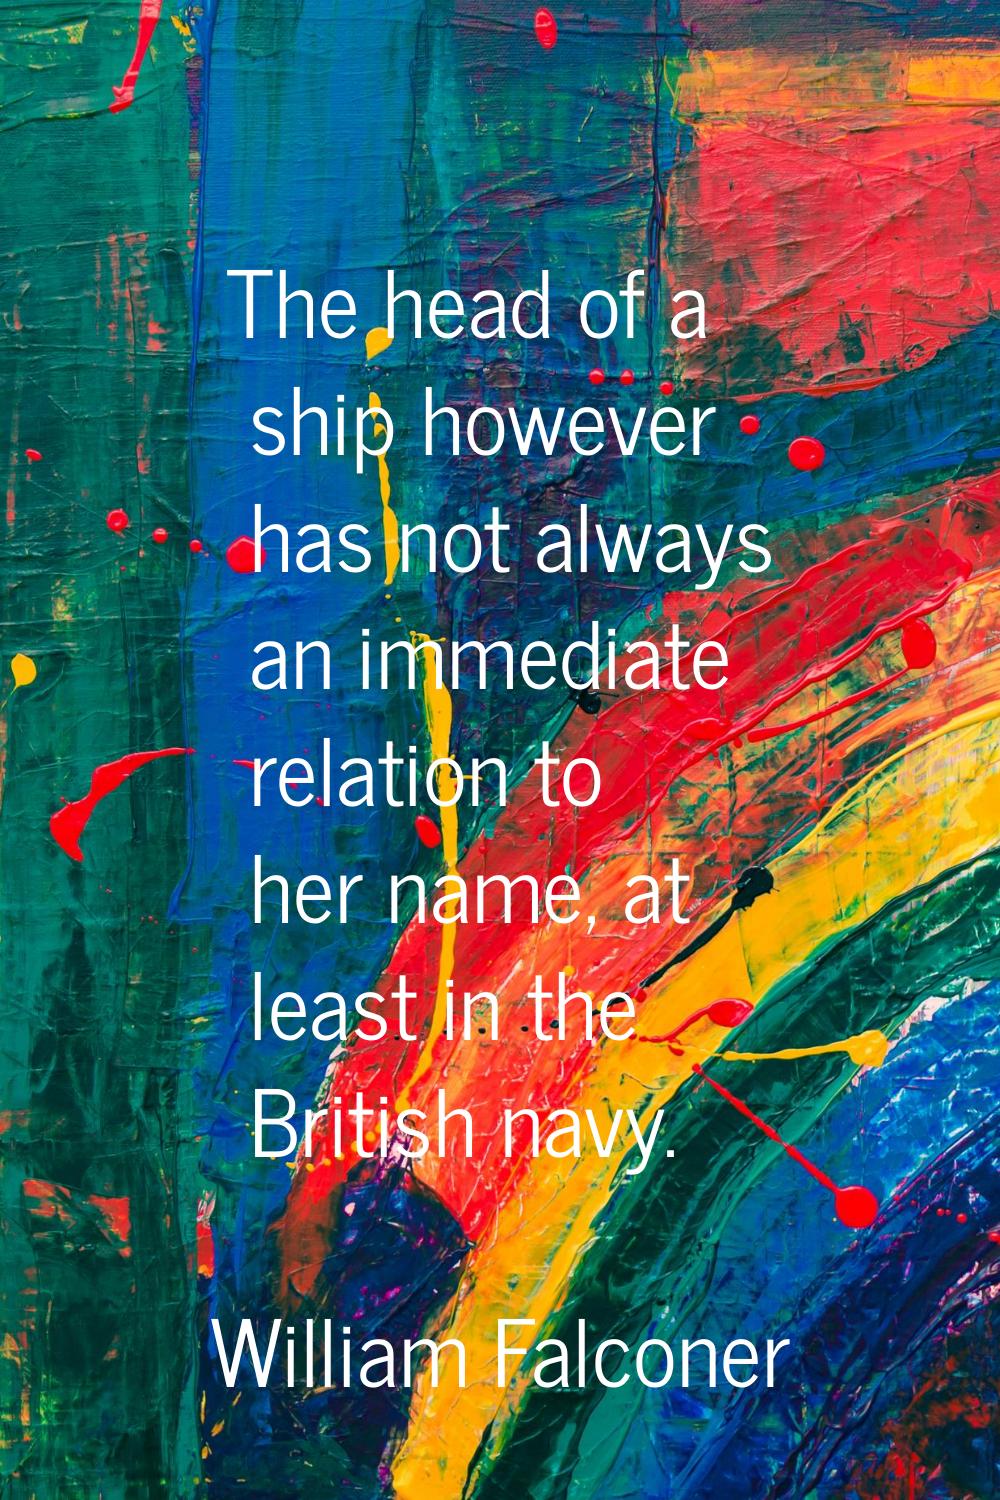 The head of a ship however has not always an immediate relation to her name, at least in the Britis